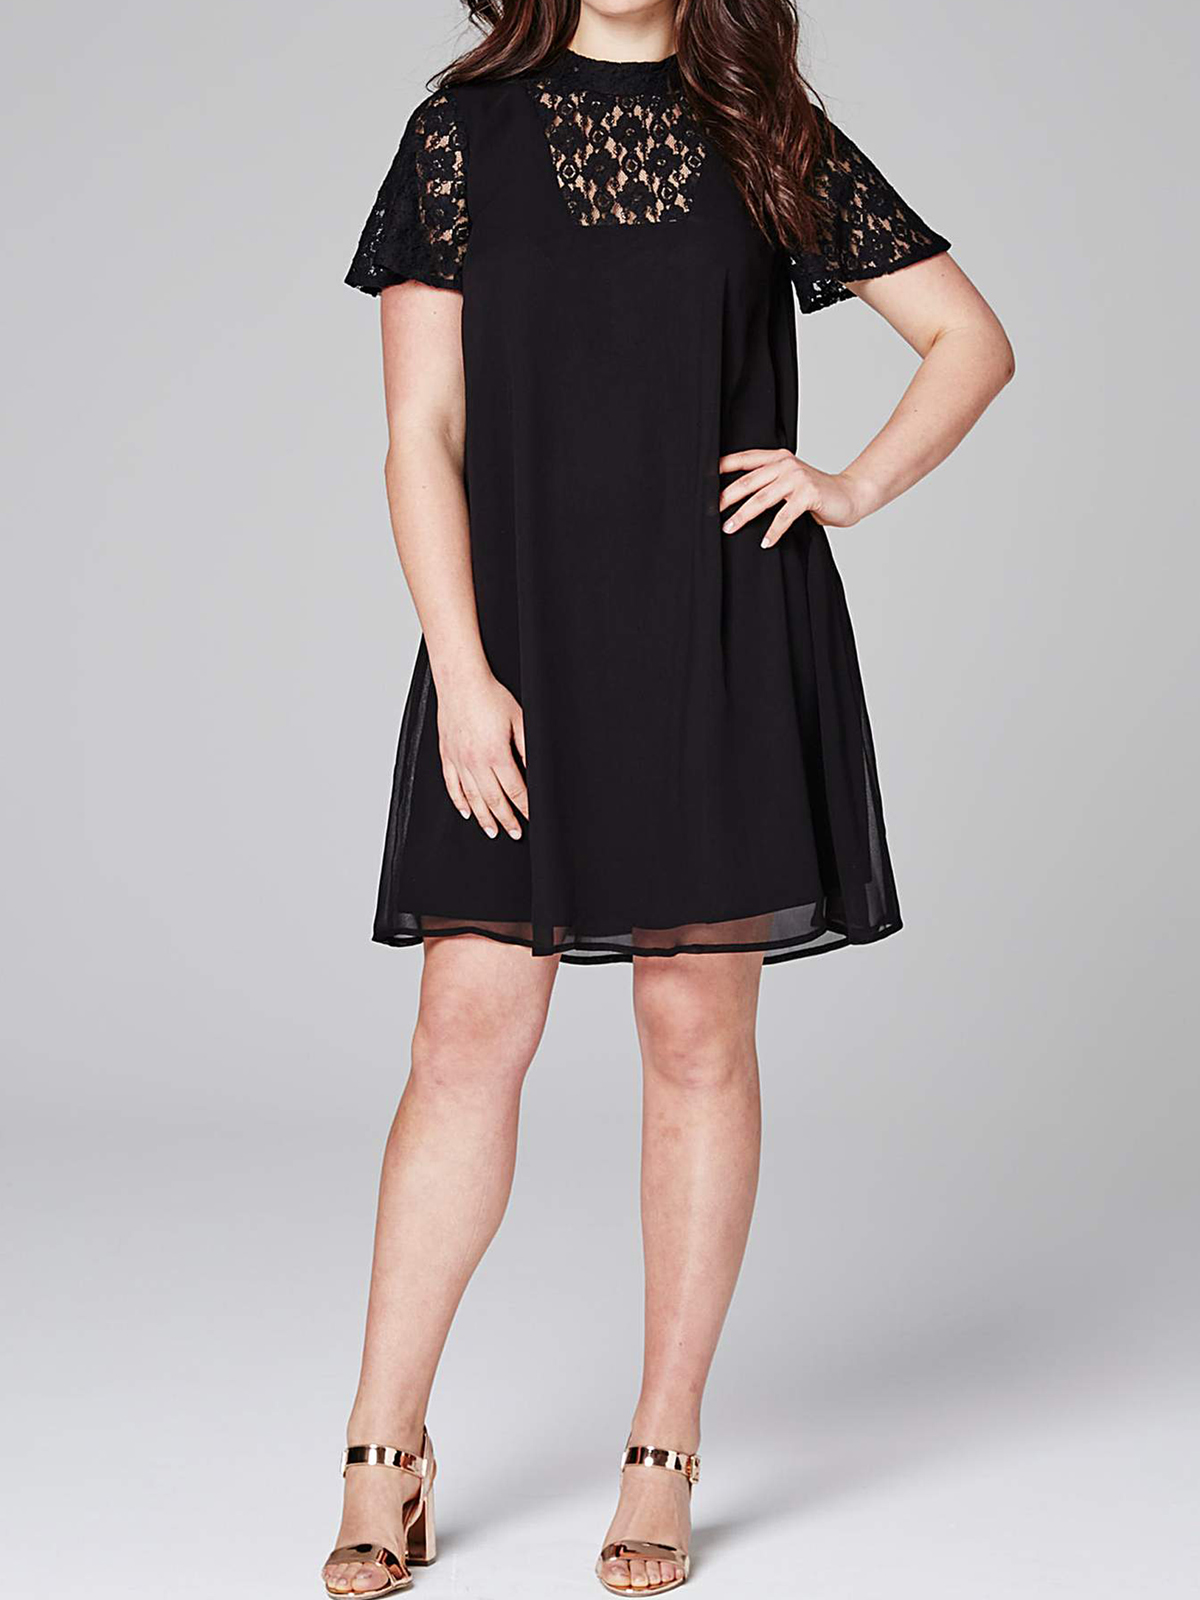 Capsule - - Capsule BLACK High Neck Lace Insert Swing Dress - Size 10 to 22